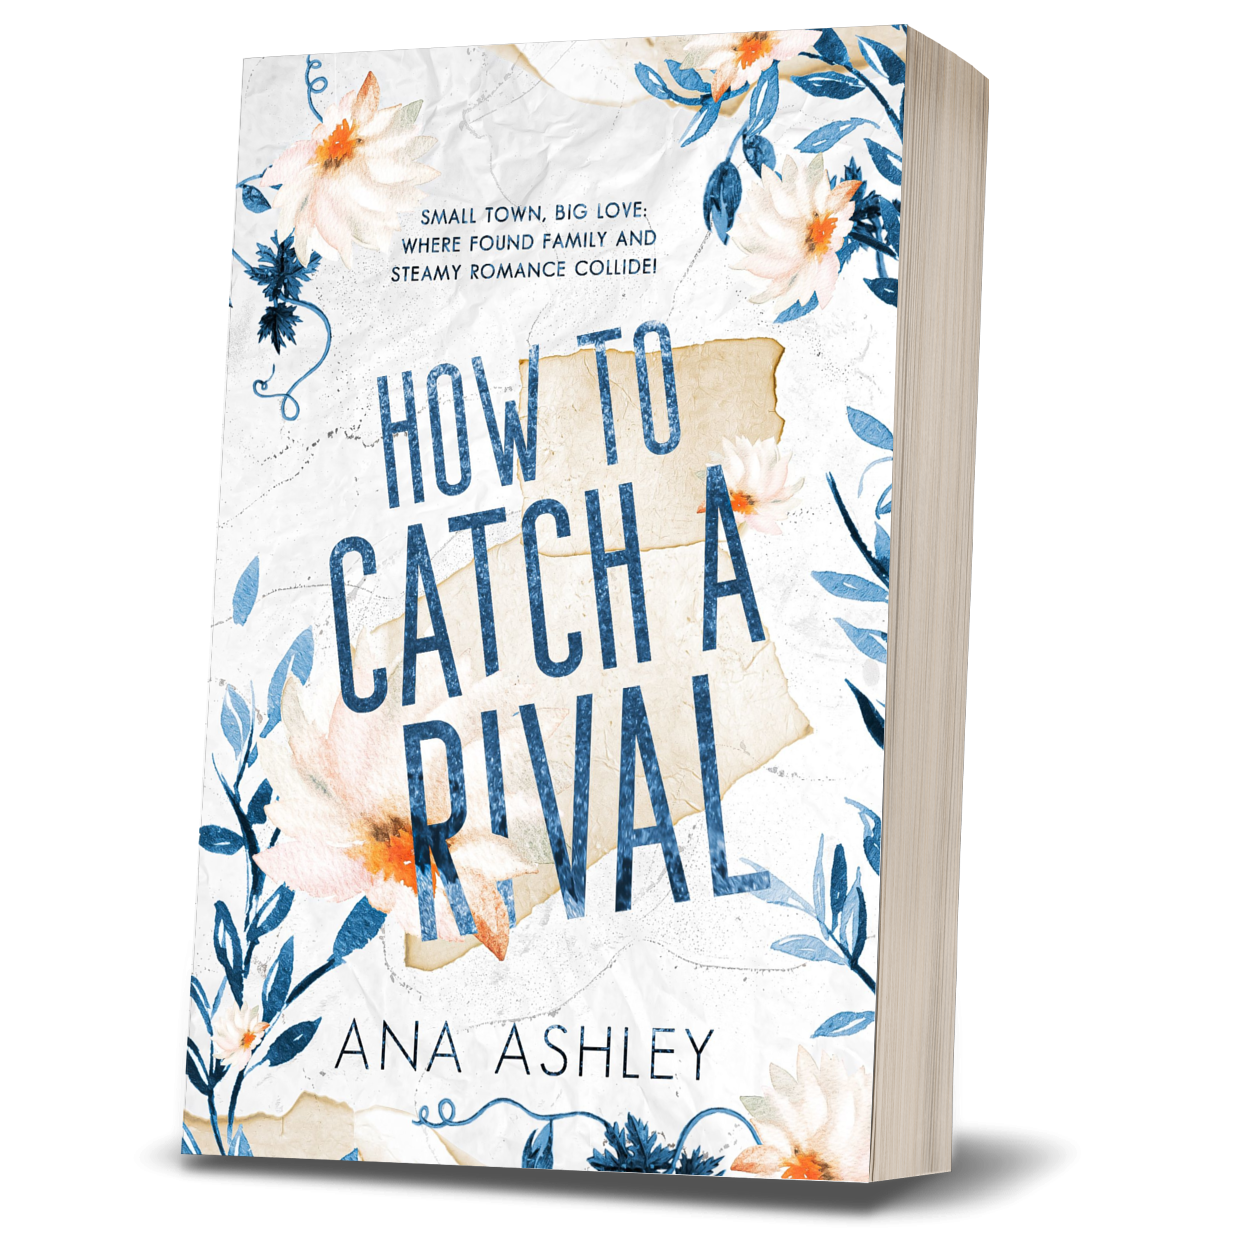 How To Catch A Rival - Chester Falls Series Book 2 (Special Edition Paperback)